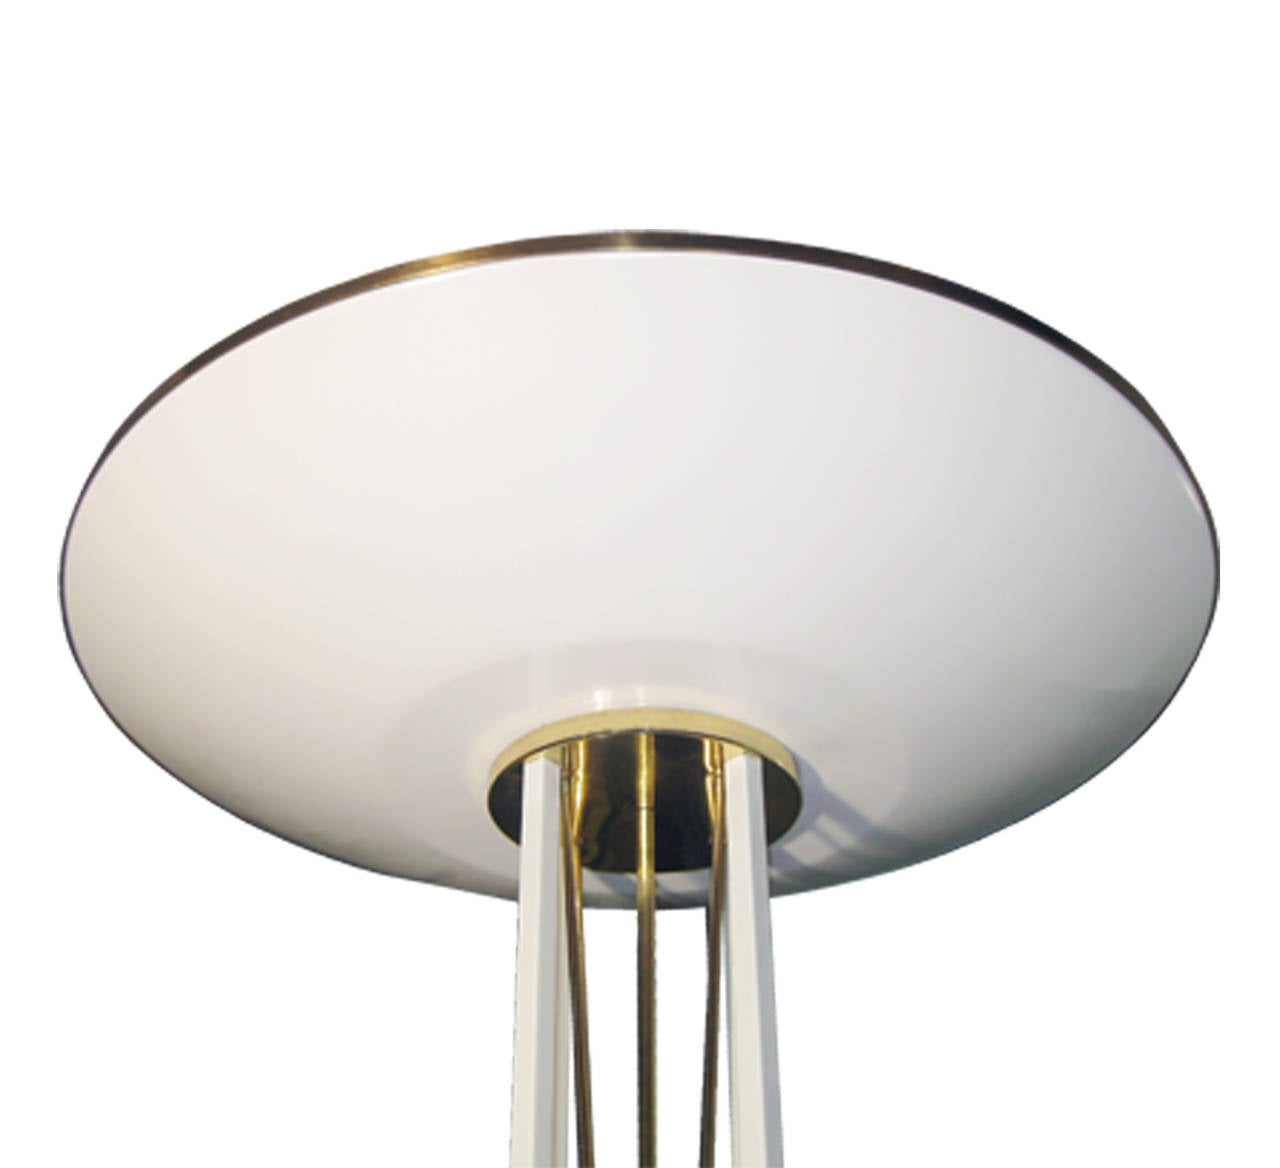 Generous, elegant lamp in lacquered white metal and brass, with halogen lighting.  This Italian firm's signature piece, circa 1970.